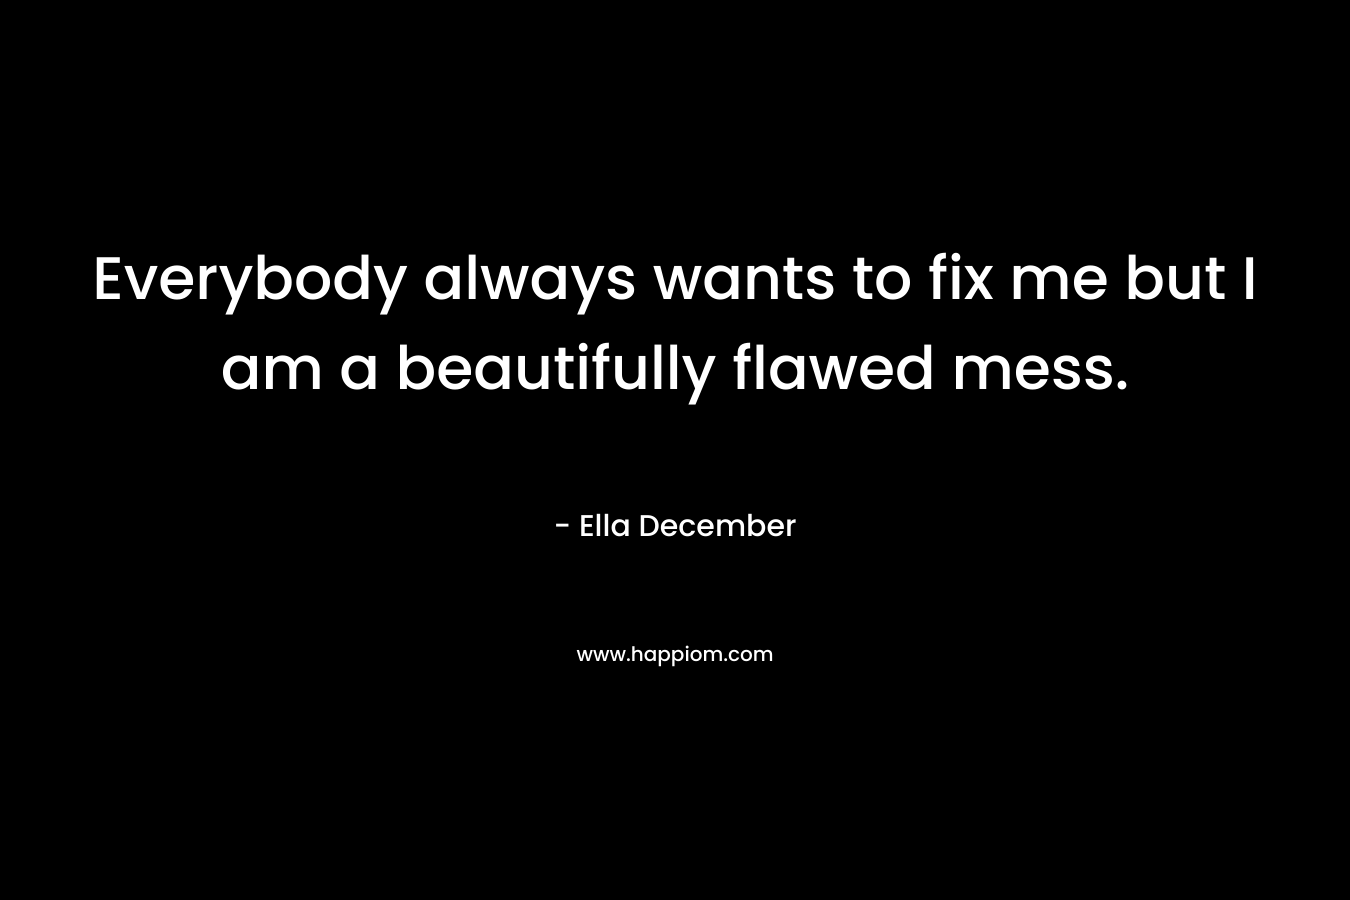 Everybody always wants to fix me but I am a beautifully flawed mess. – Ella December